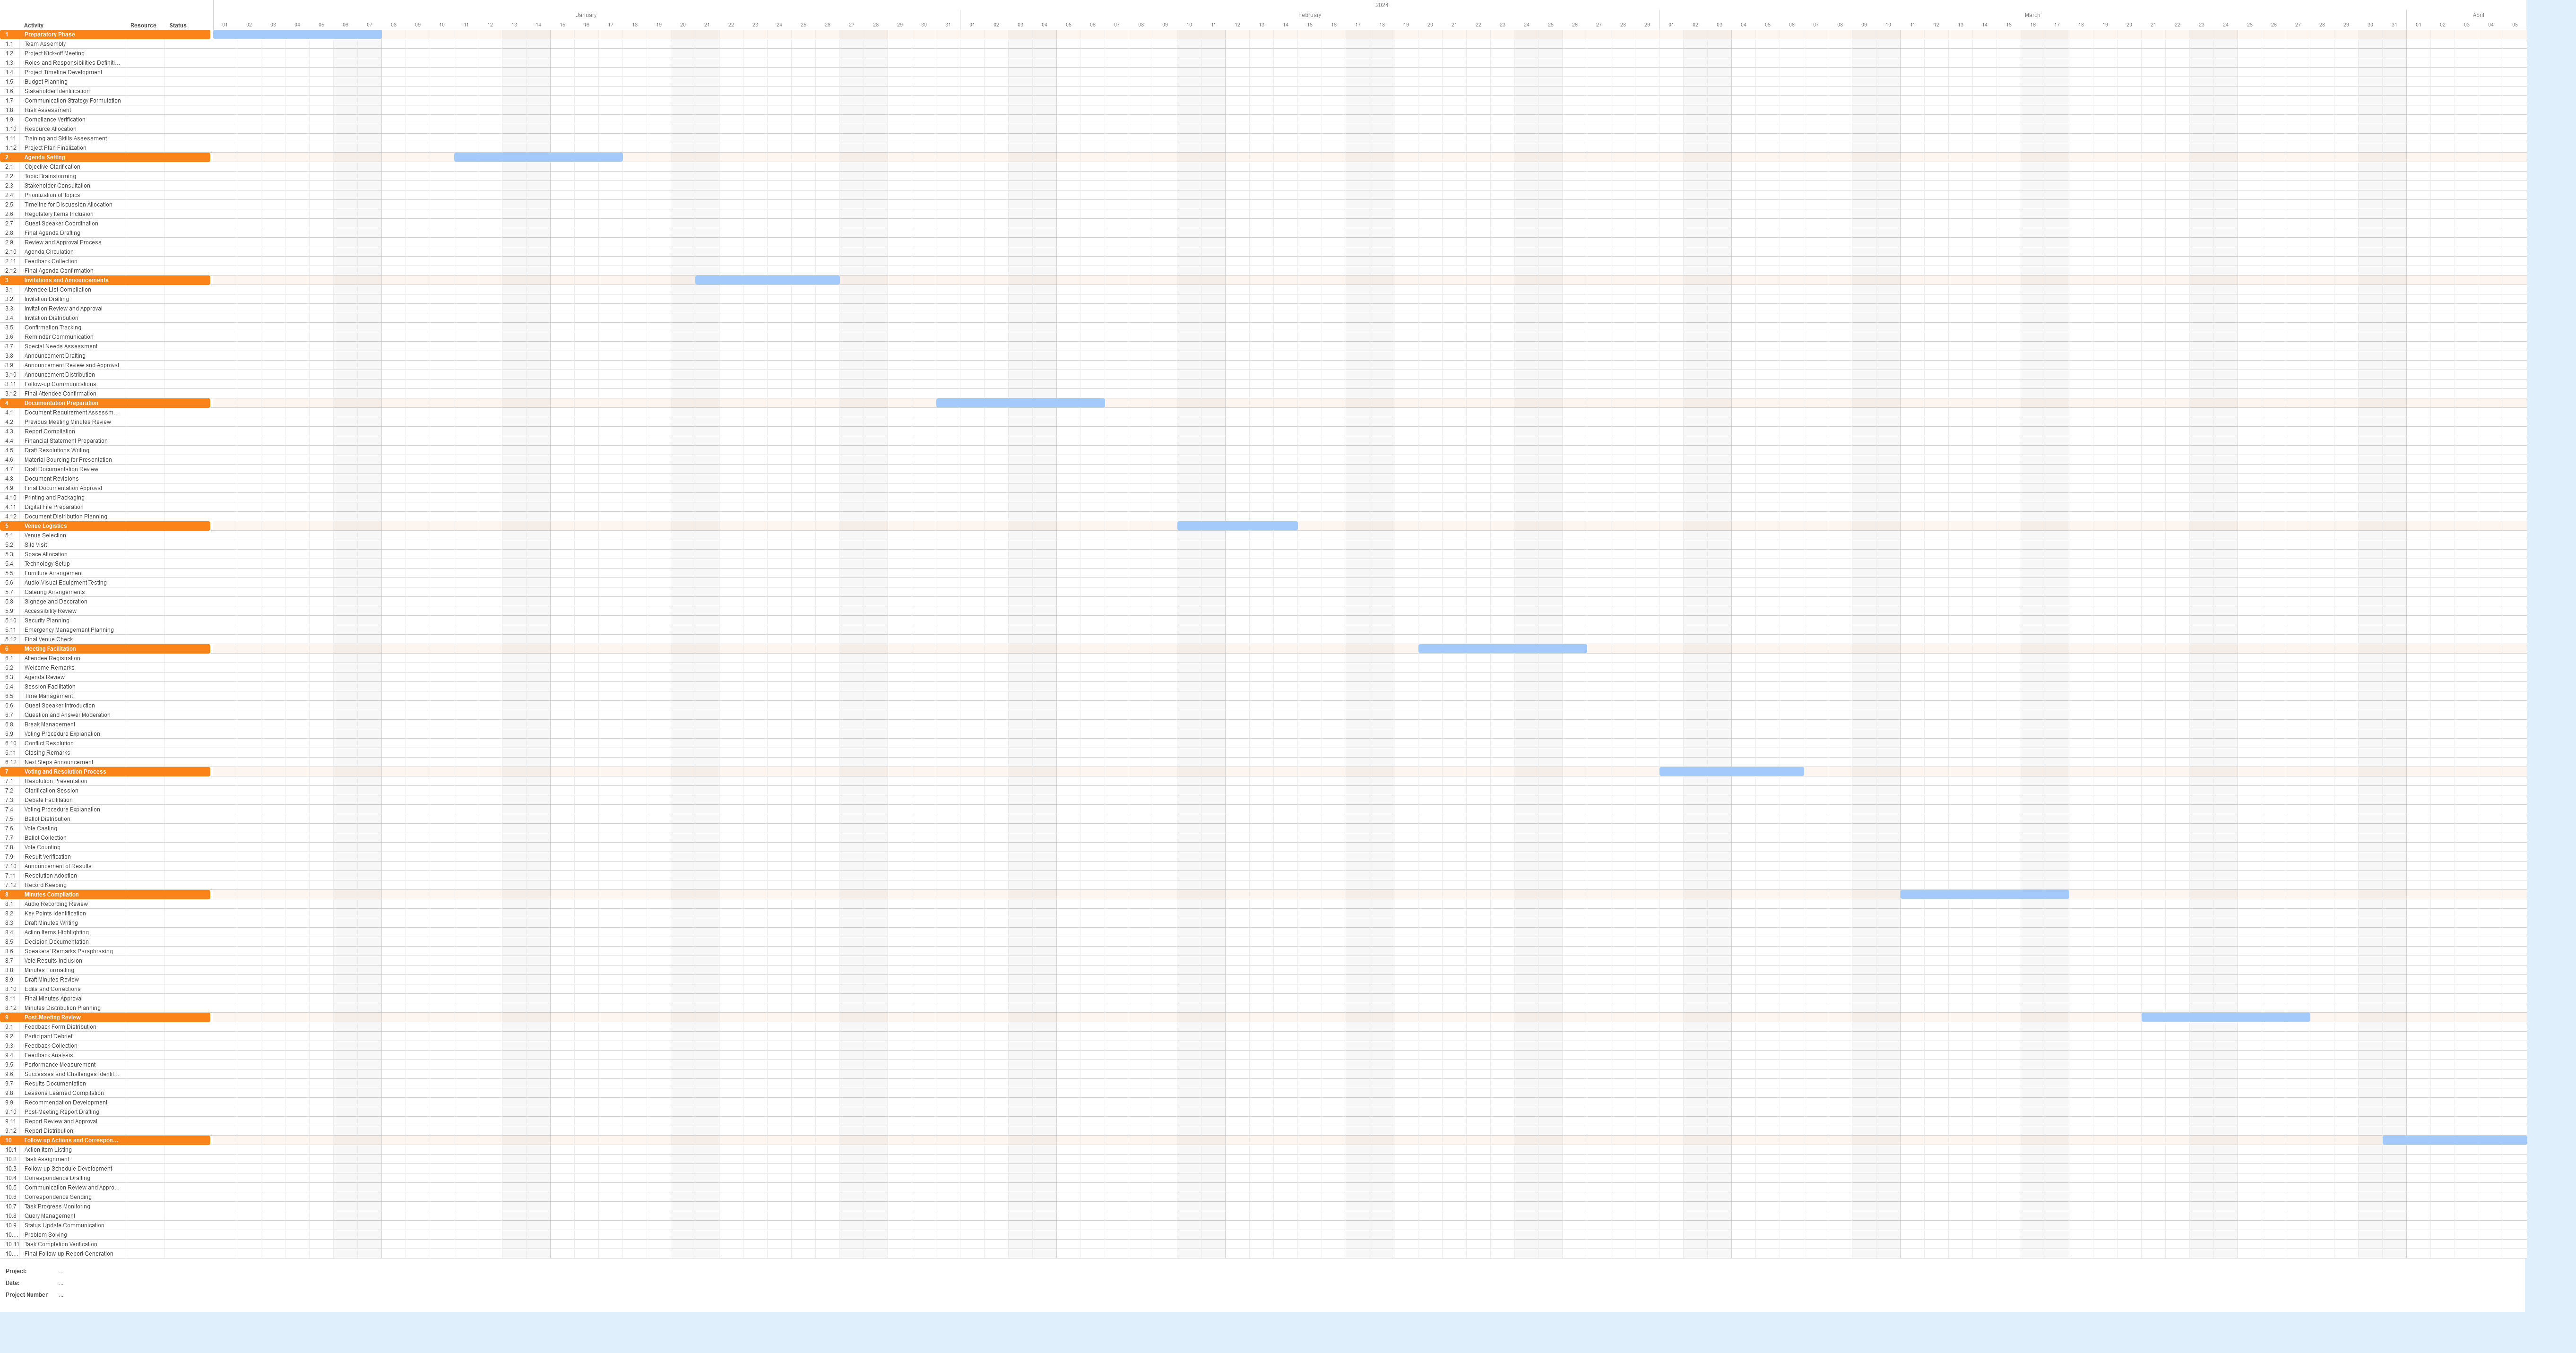 Gantt chart for a Annual General Meeting project